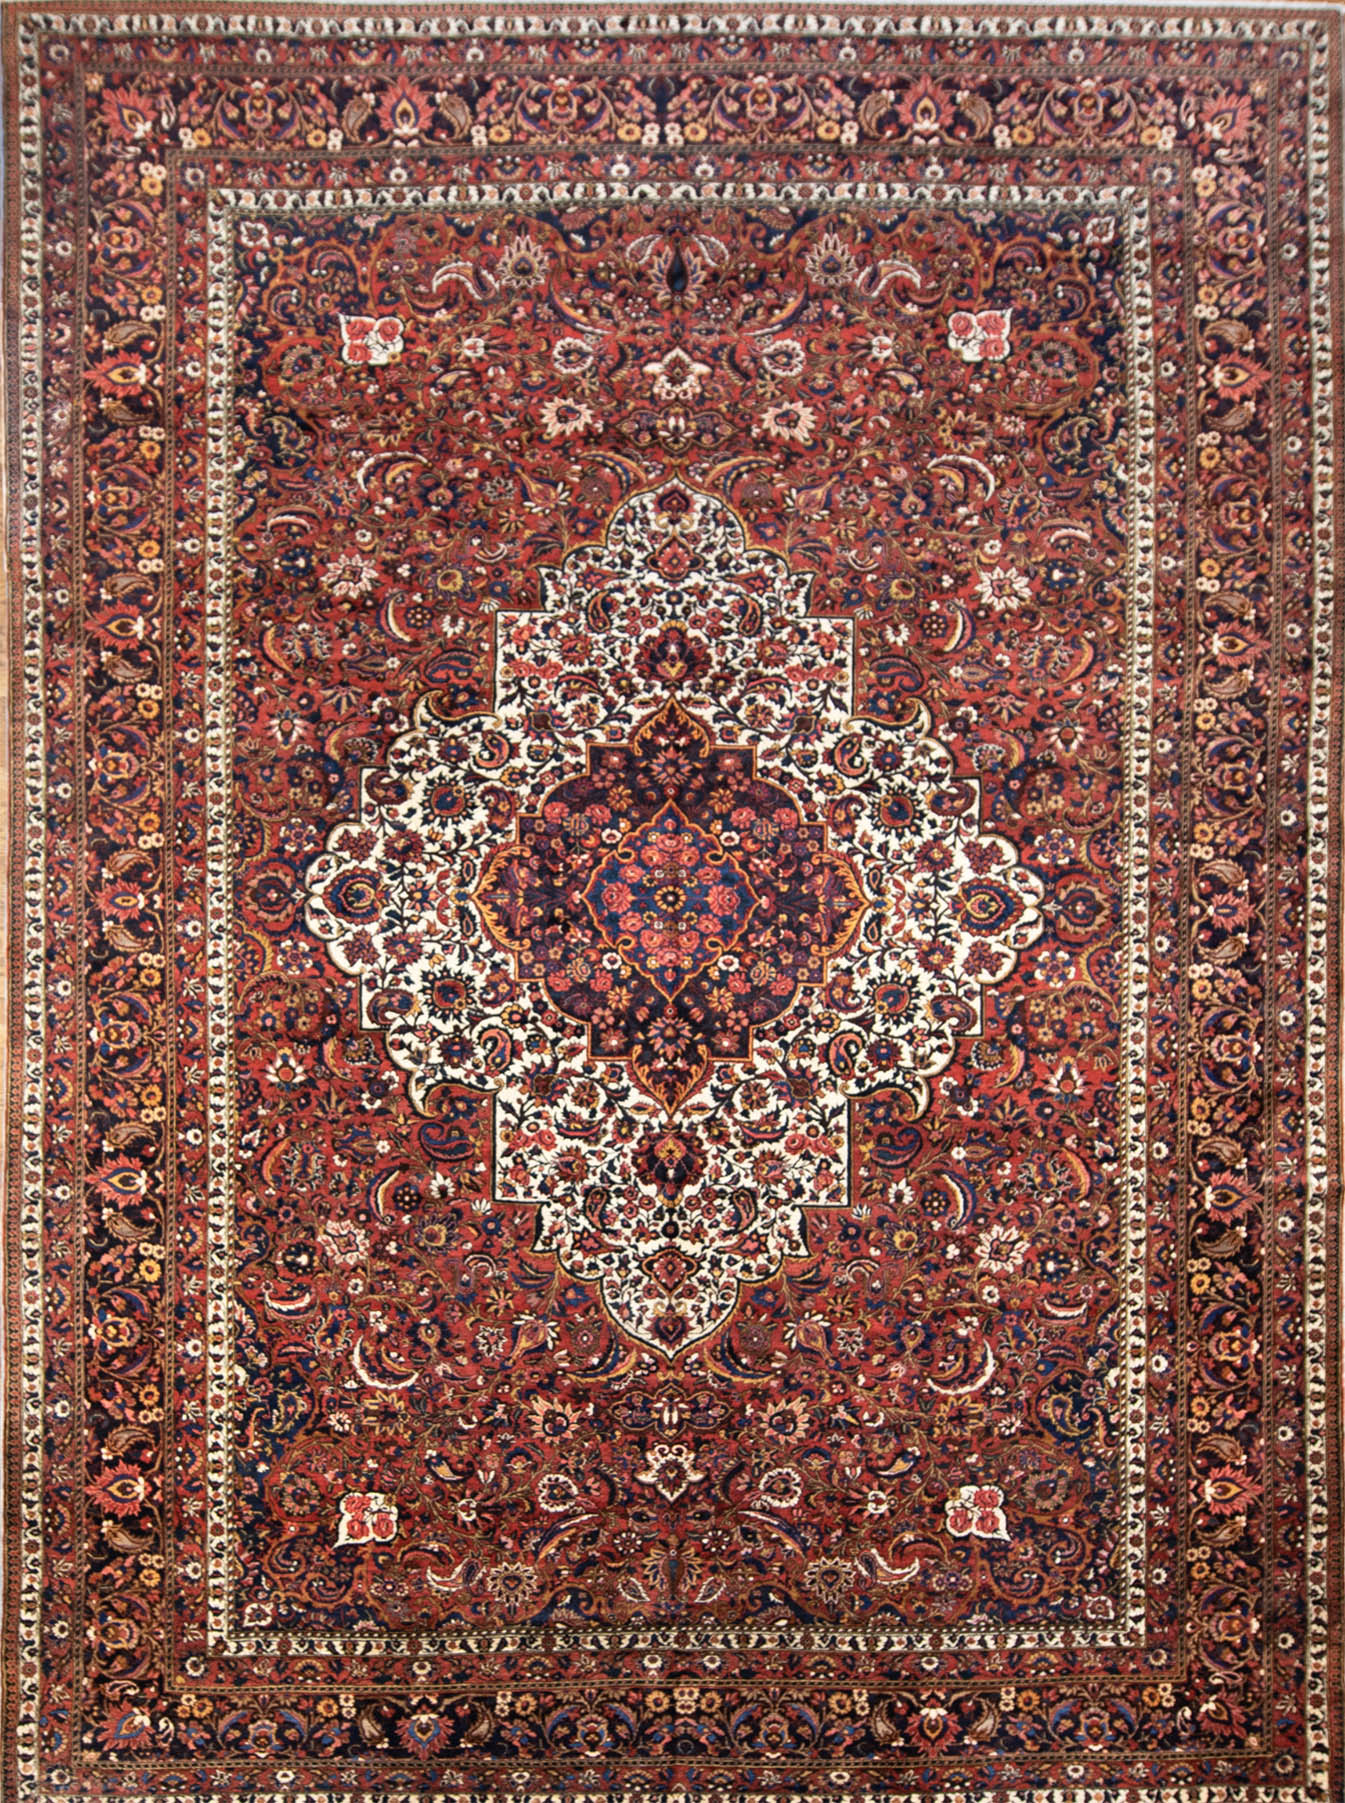 Antique Rug, Antique Persian Bakhtiari Rug with terracotta red color. Size 11x15.